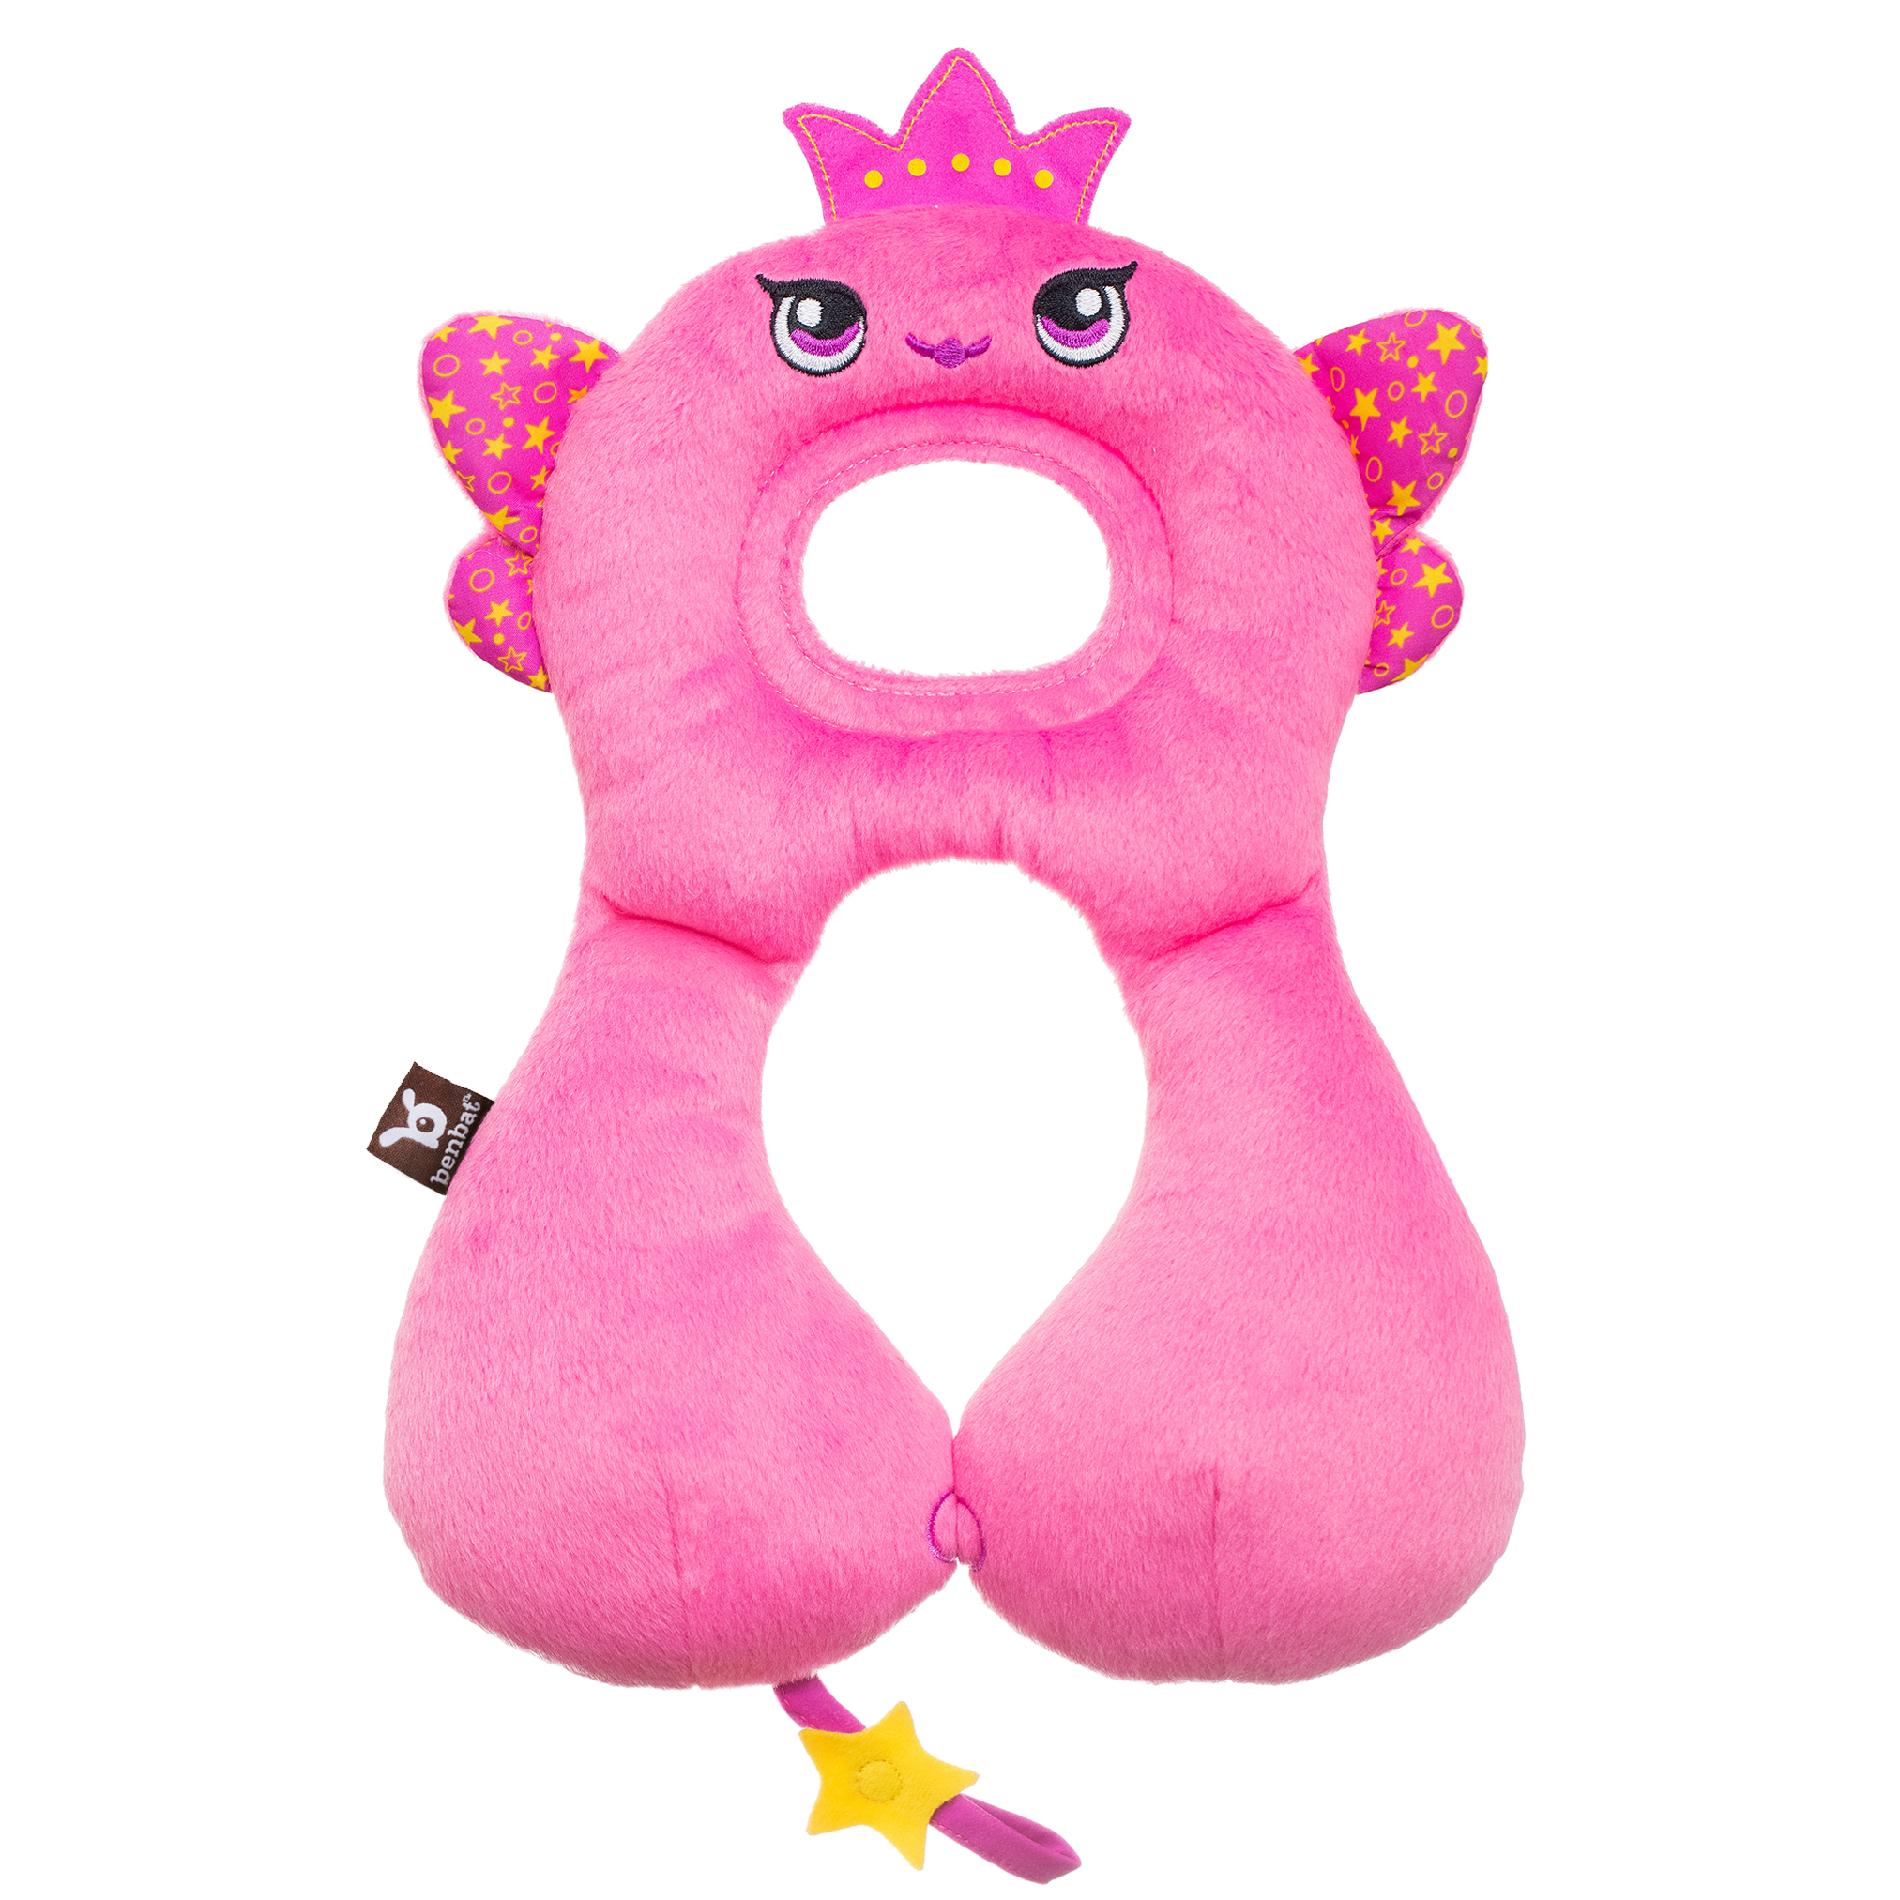 Travel Friends Head and Neck Support - Fairy (1-4 years old)